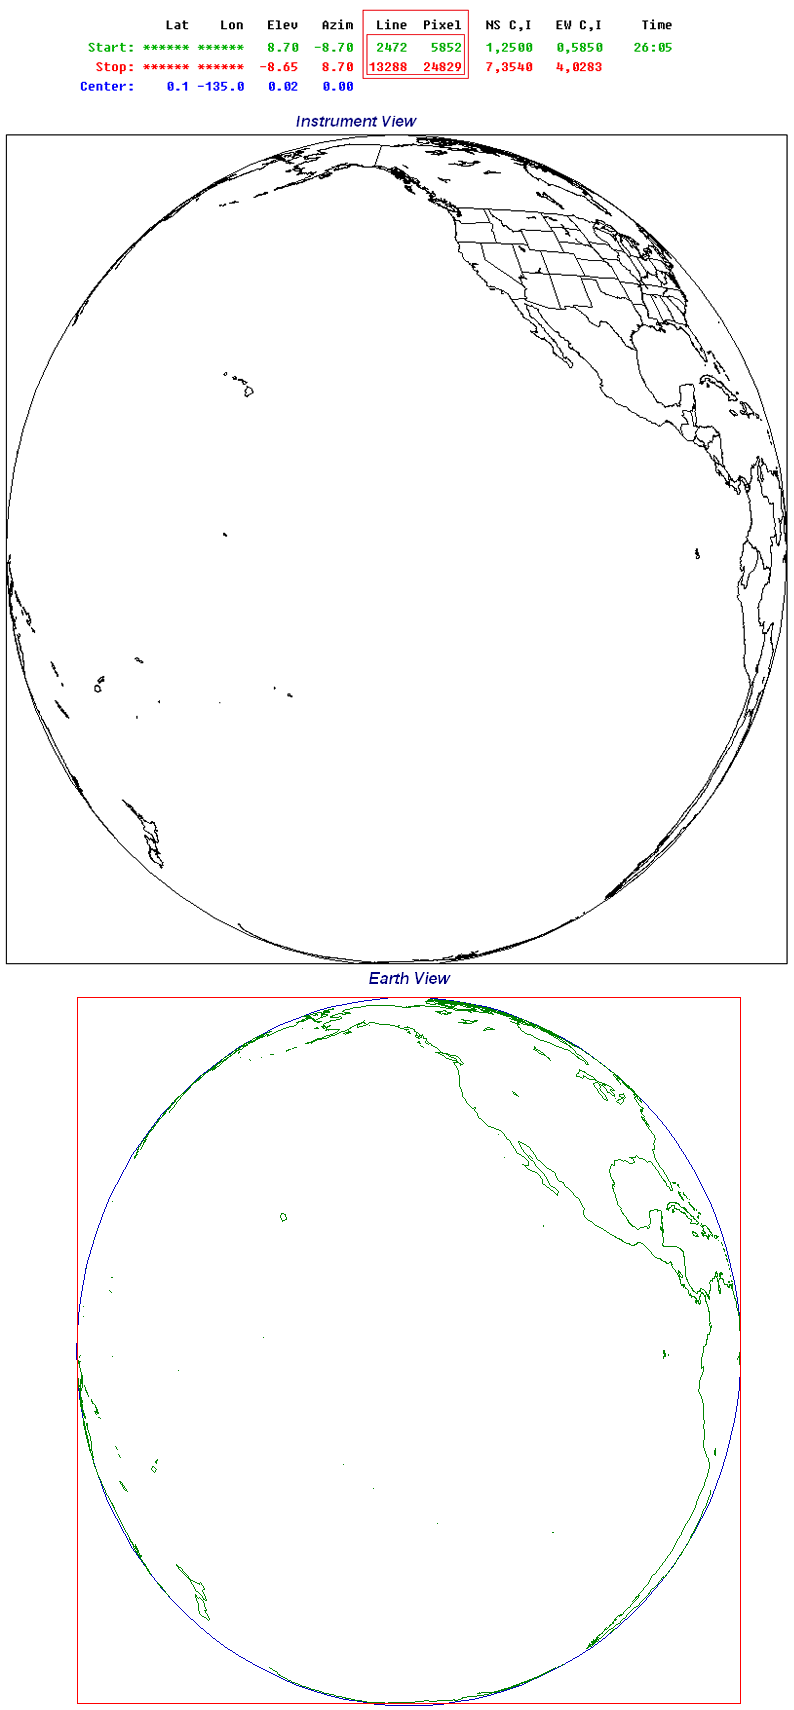 Depiction of Multiple Scaning strategies on Full Disk GOES-15 Footprint